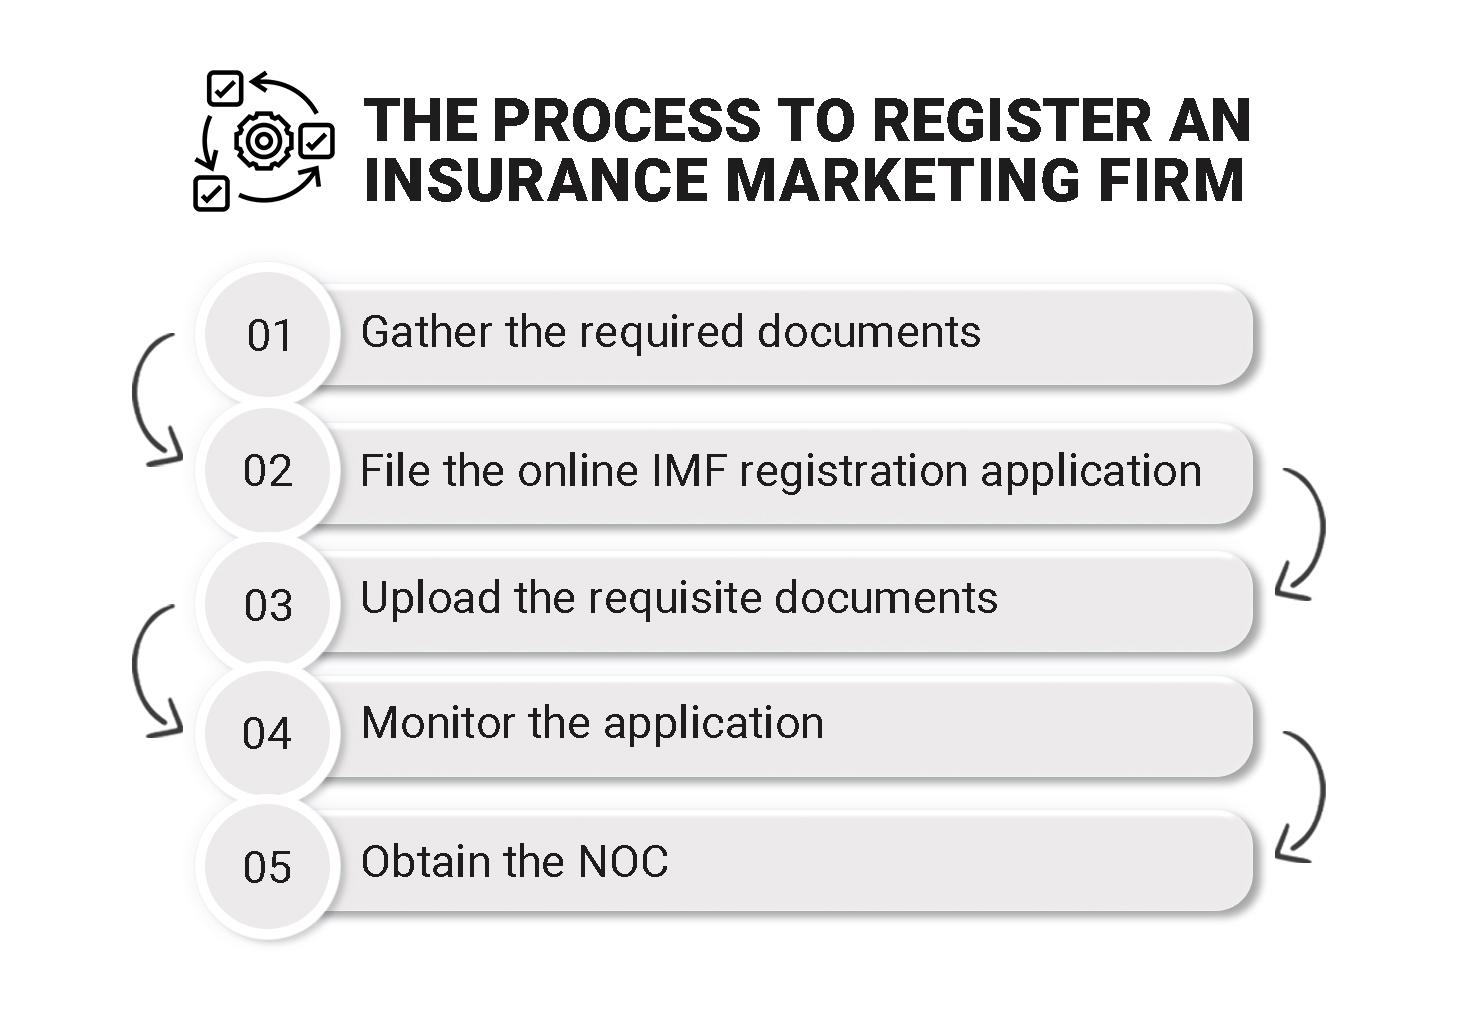 Process to register an Insurance Marketing firm in India